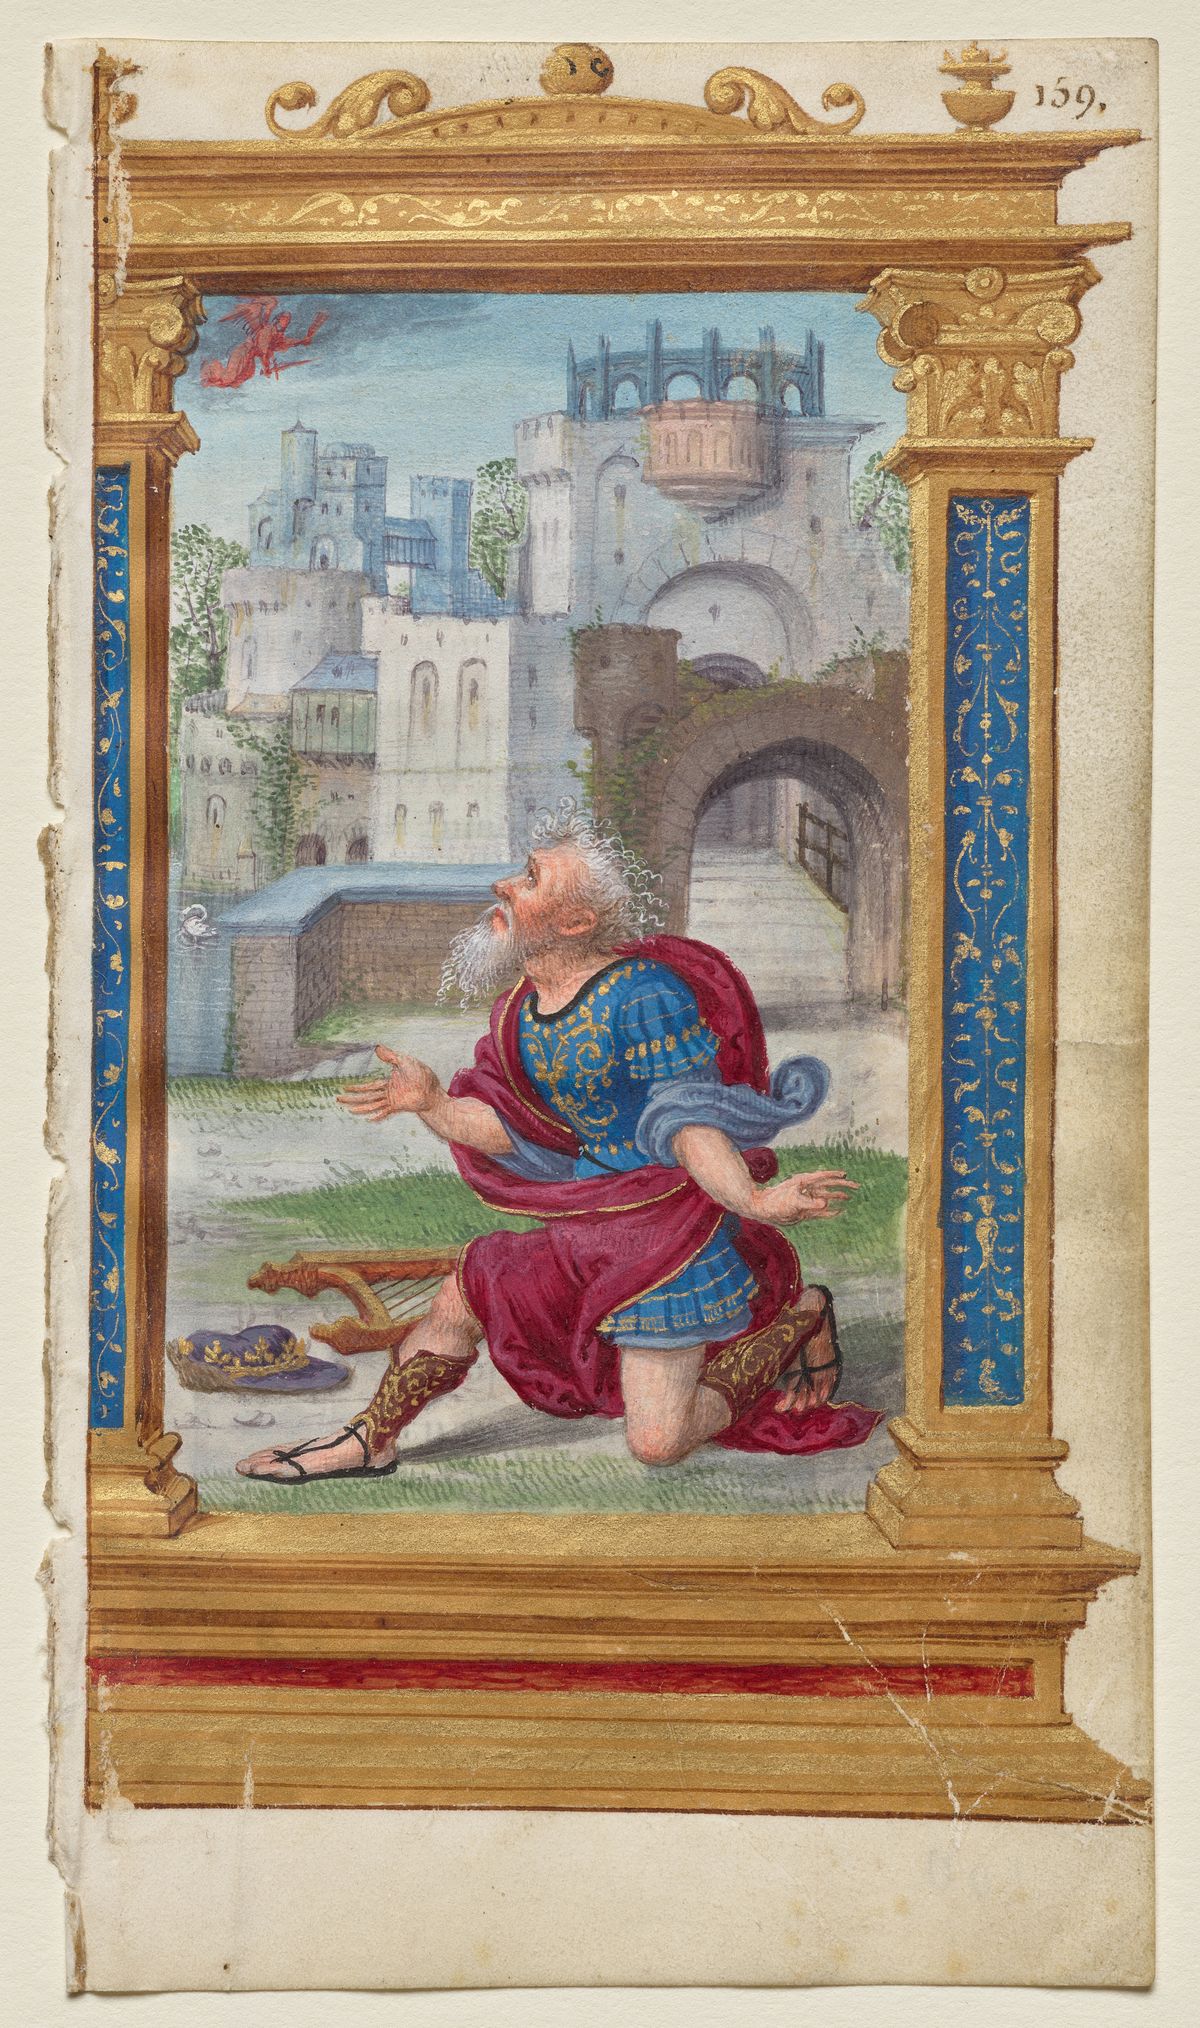 Leaf from a Book of Hours: King David in Prayer (1530–1535) by Noël Bellemare - Public Domain Illuminated Manuscript